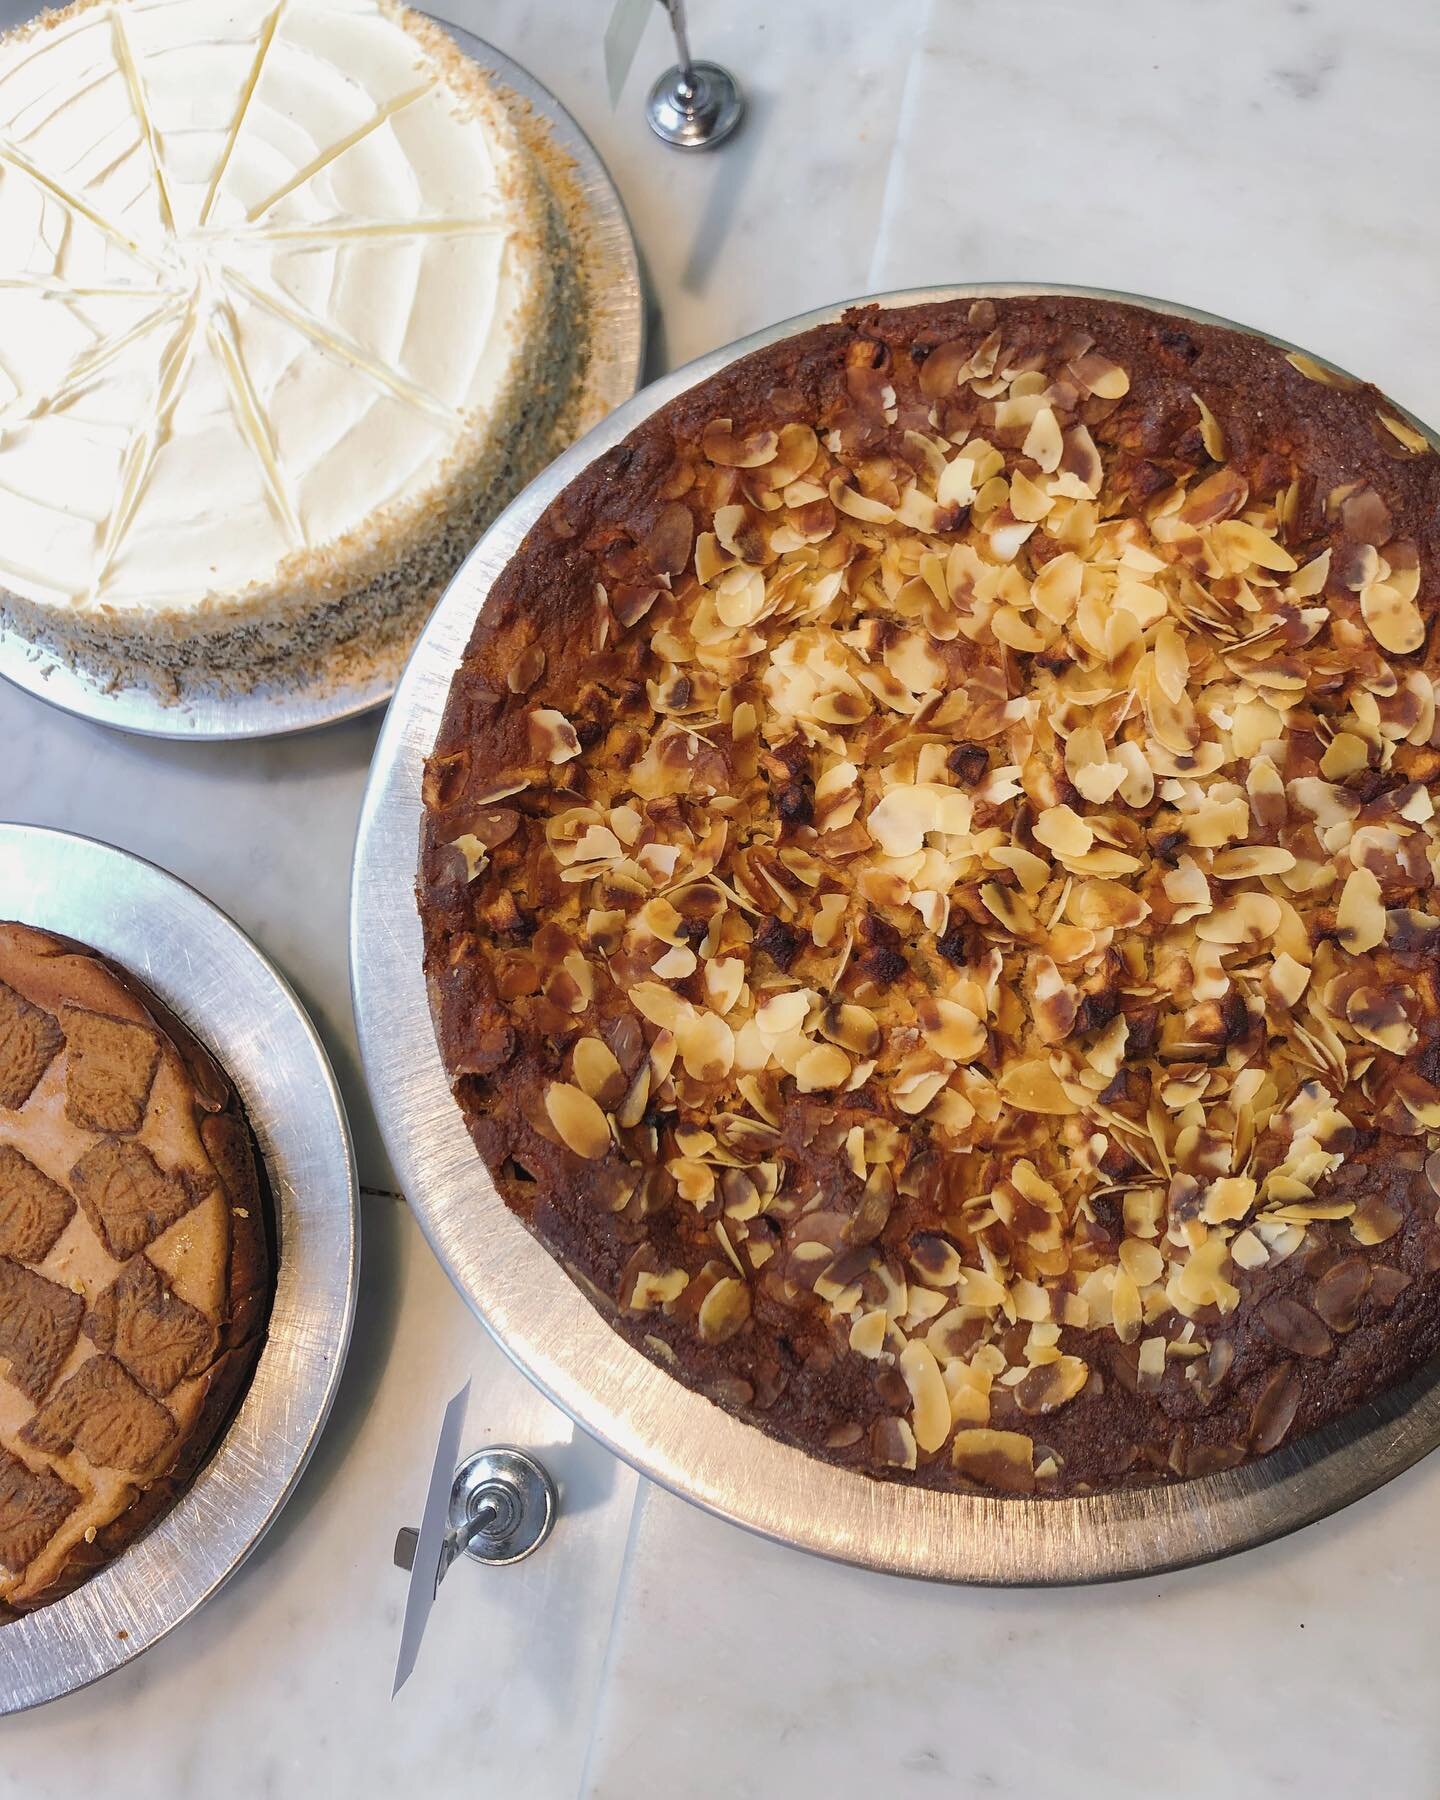 Apple pie, apple crumble, apple cake, vegan, sugarfree or with all the bells and whistles, apples are definitely a fall favourite at Julienne - local and organic, of course.

Pictured here is Philippa - apple cake with cinnamon, ginger, almonds and r